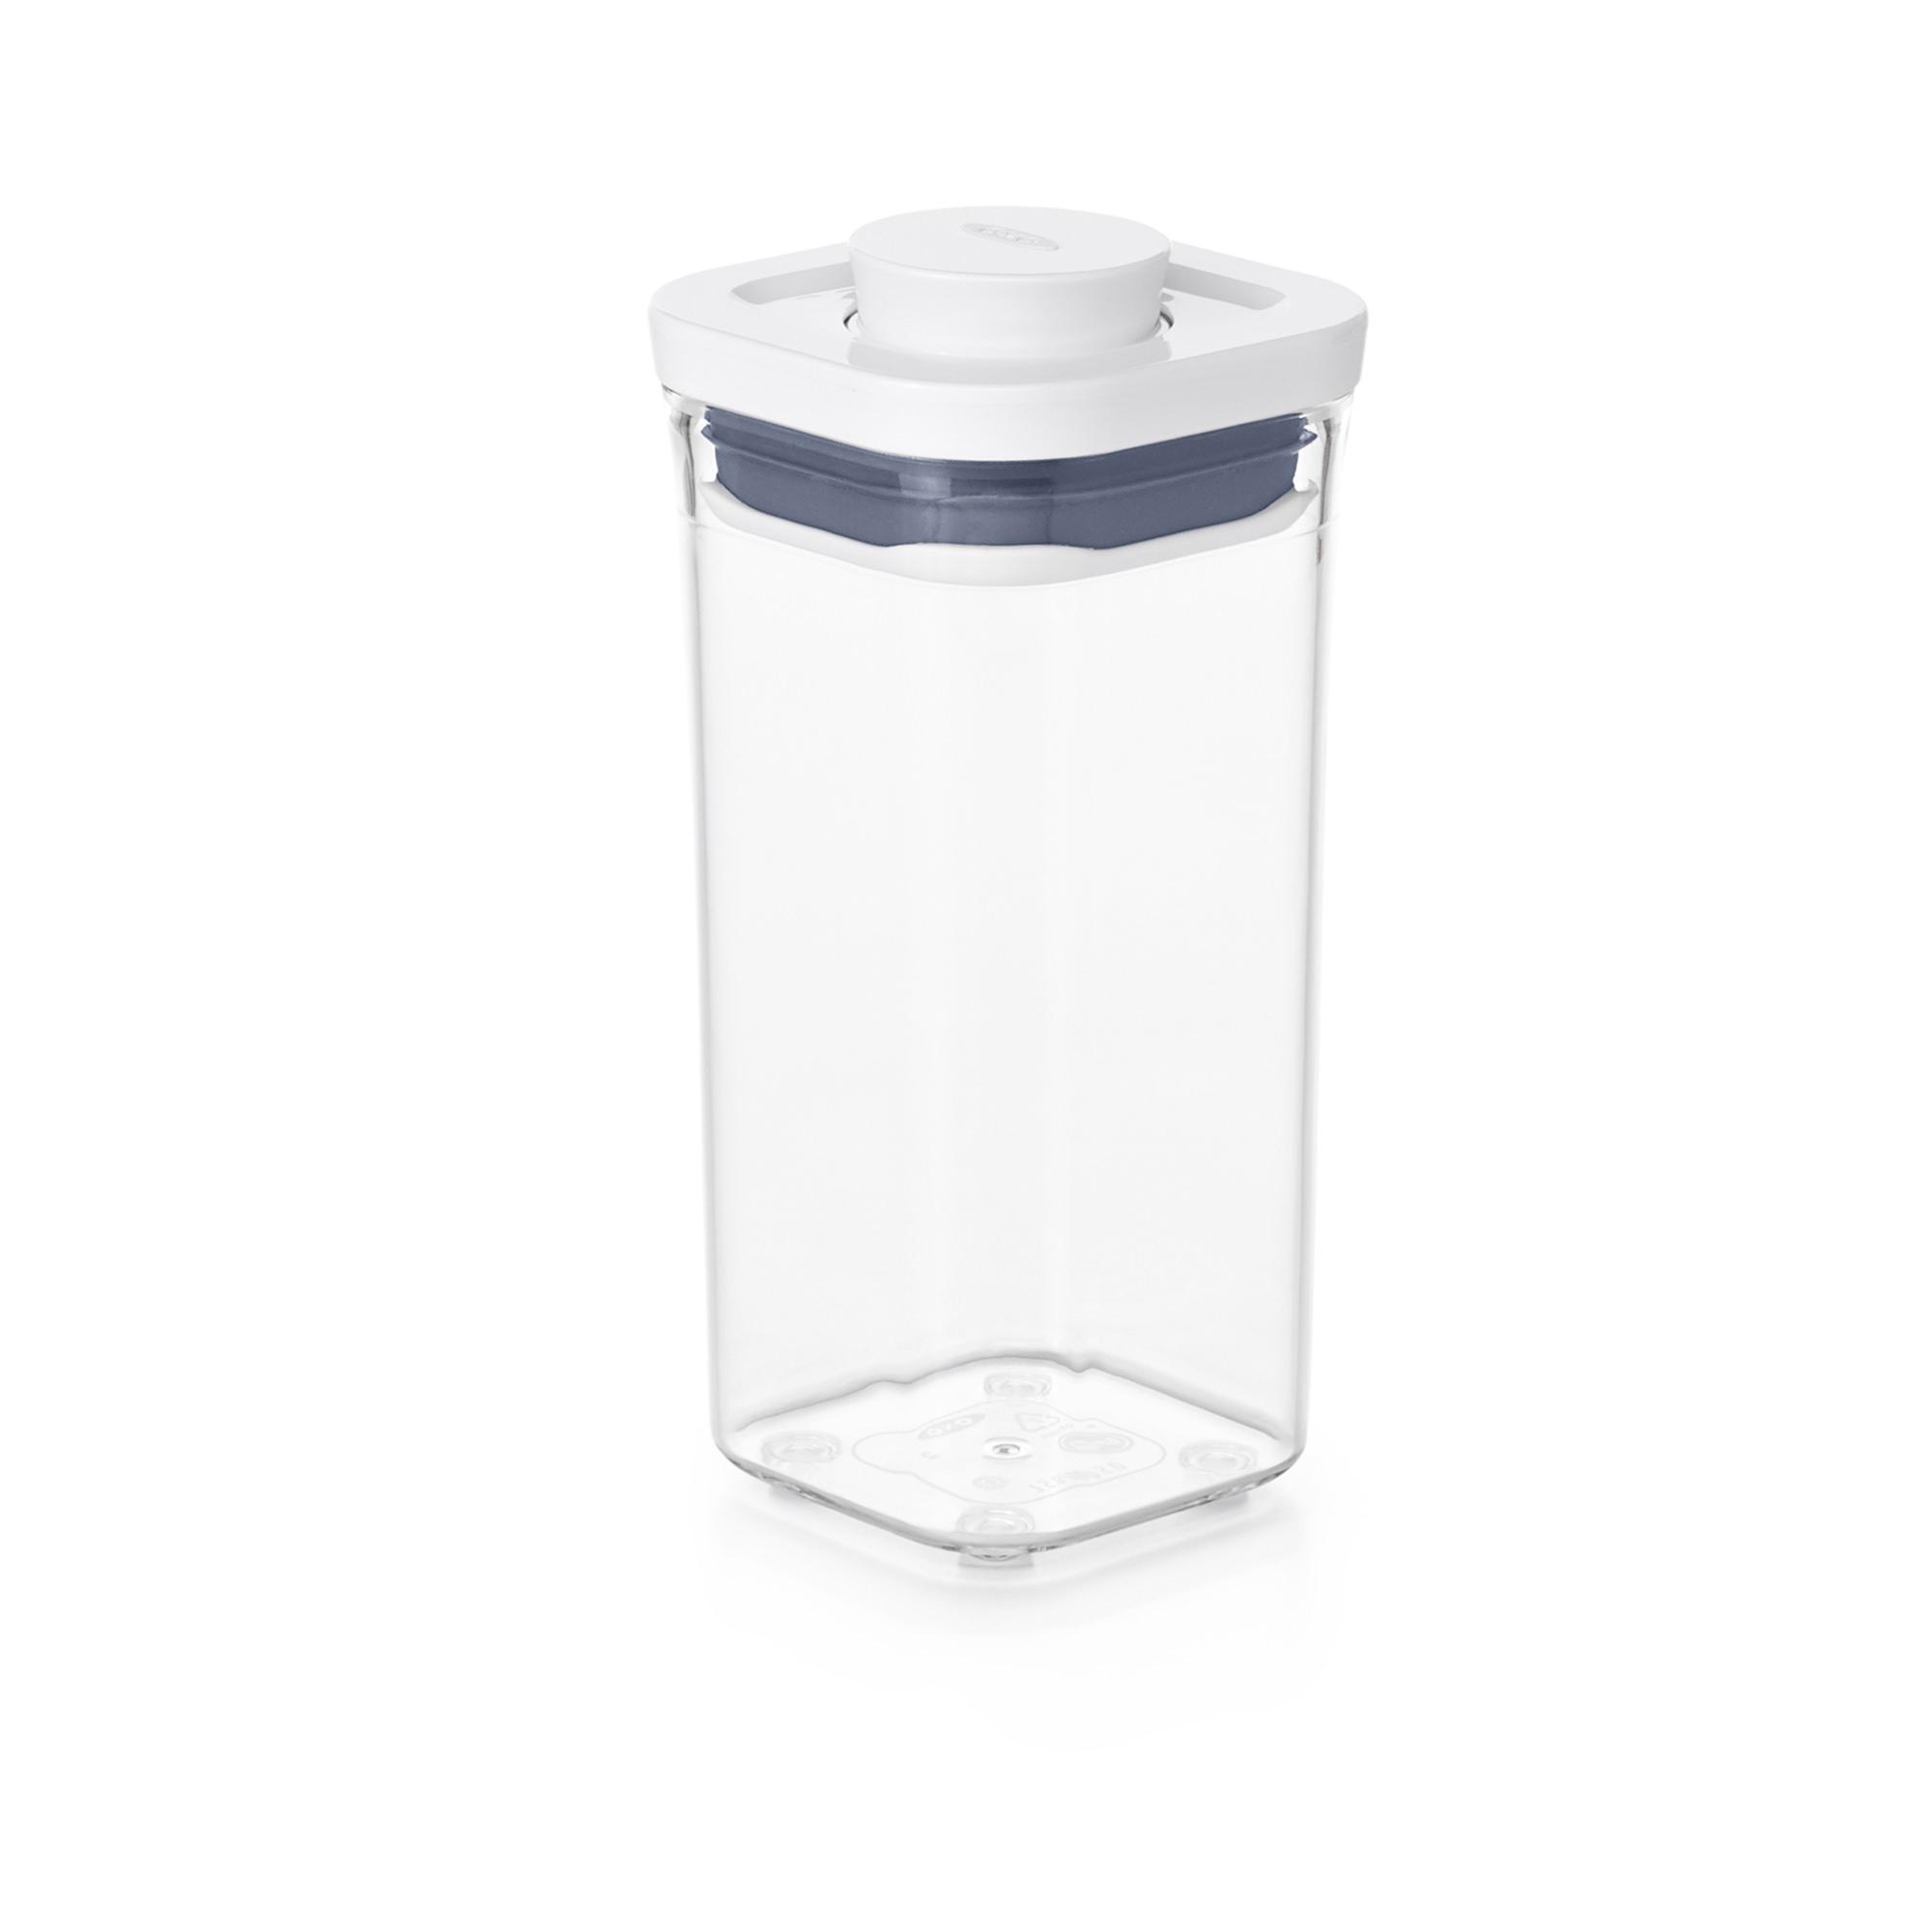 OXO Good Grips Square Pop 2.0 Container 500ml Image 3